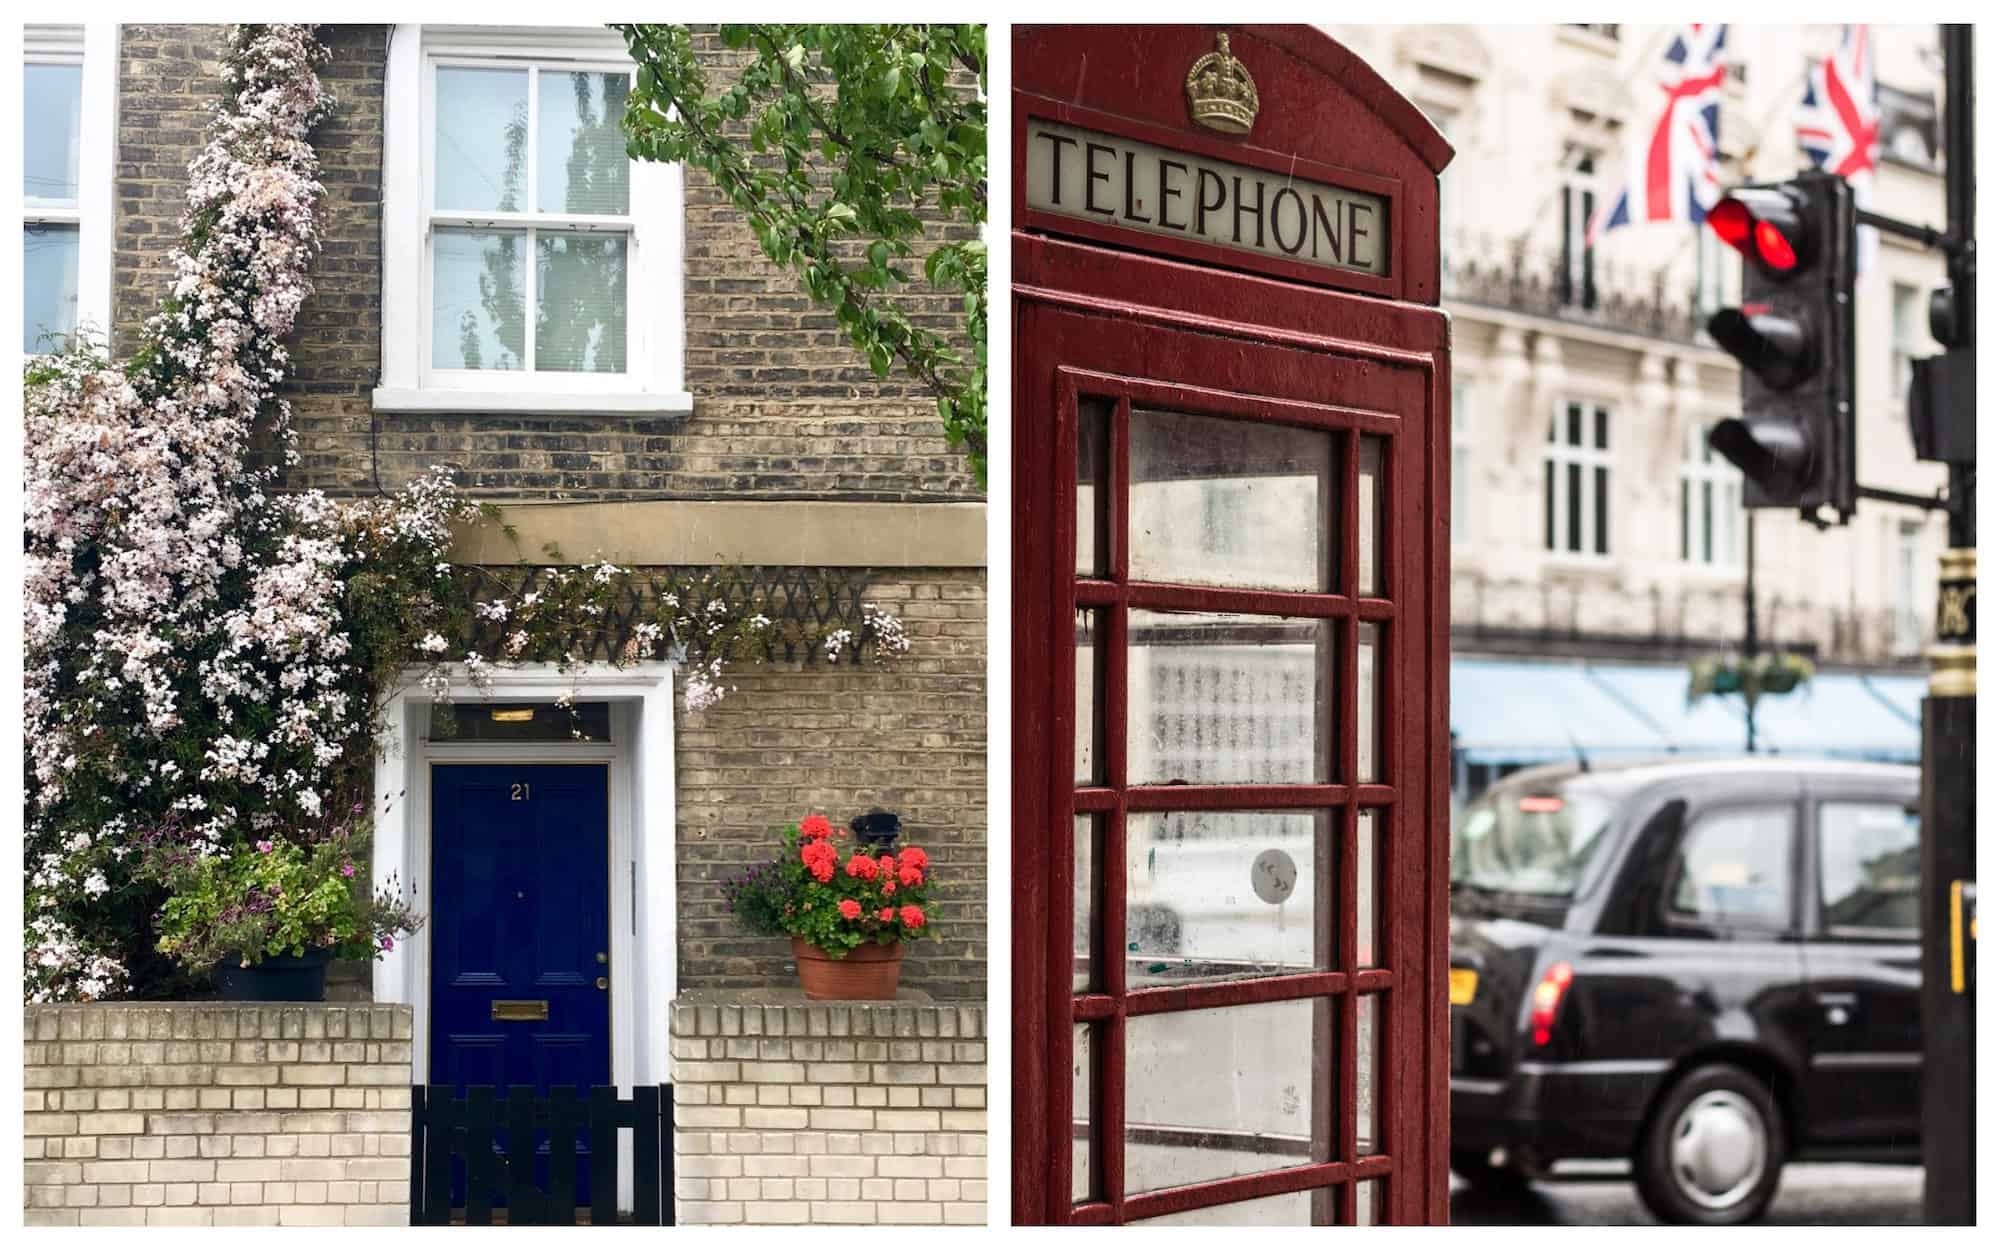 A London house with a blue door and pretty crawling plants in full bloom creeping up the brick walls (left). An old red telephone box with a black cab in the background in London (right).